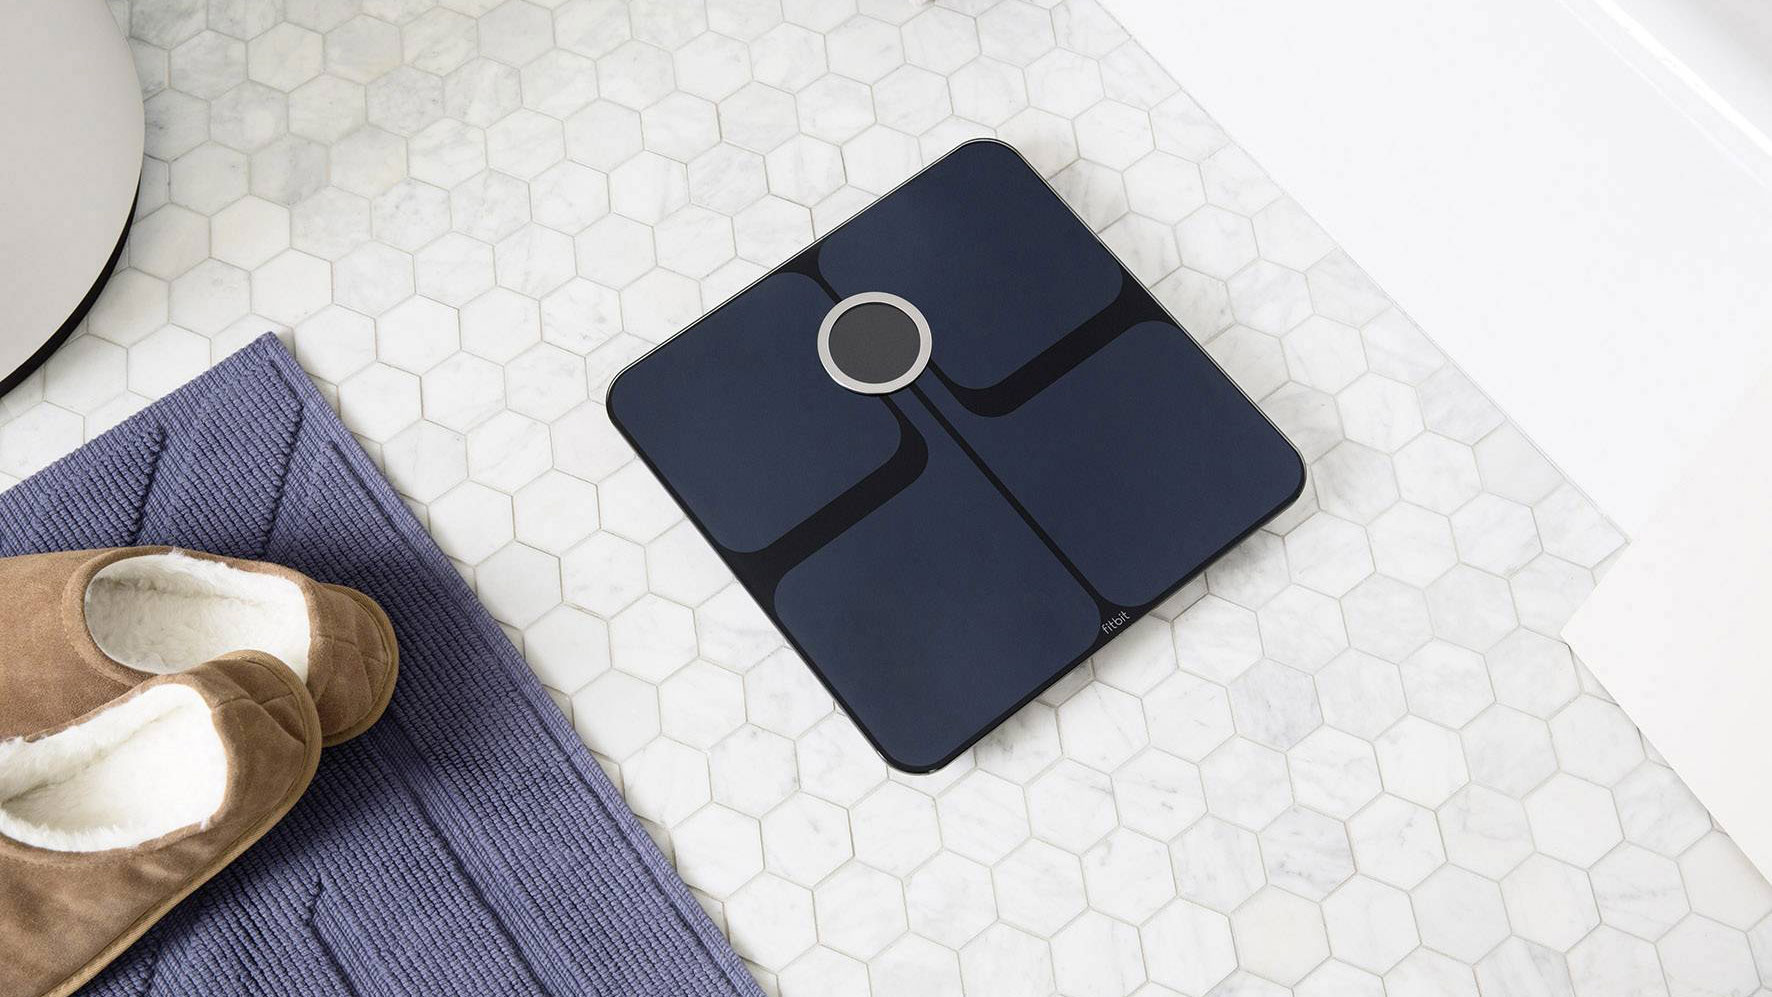 Fitbit Aria 2 review: elegant smart scales that Fitbit users will love